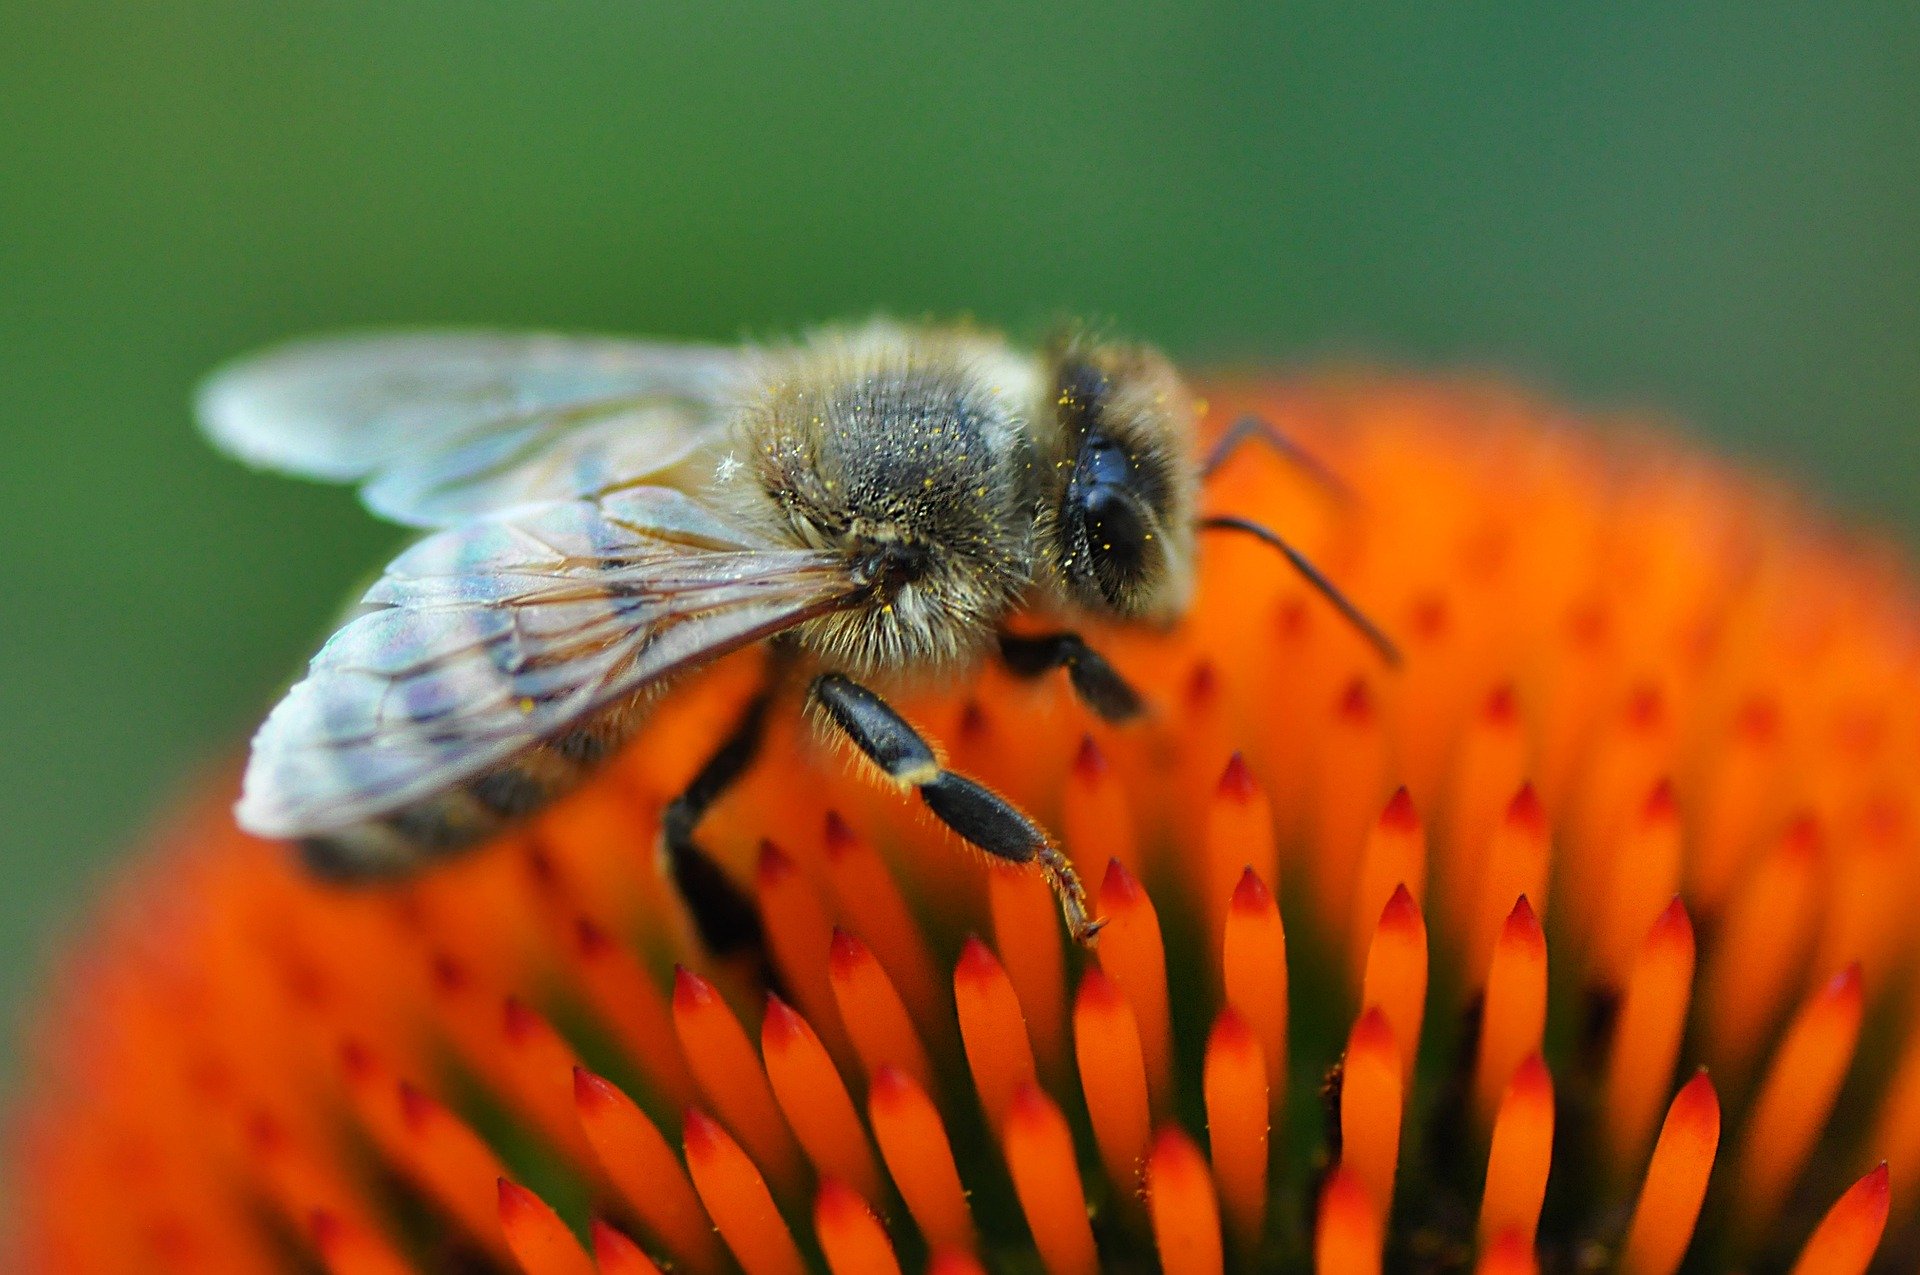 Bees and other pollinators are under attack